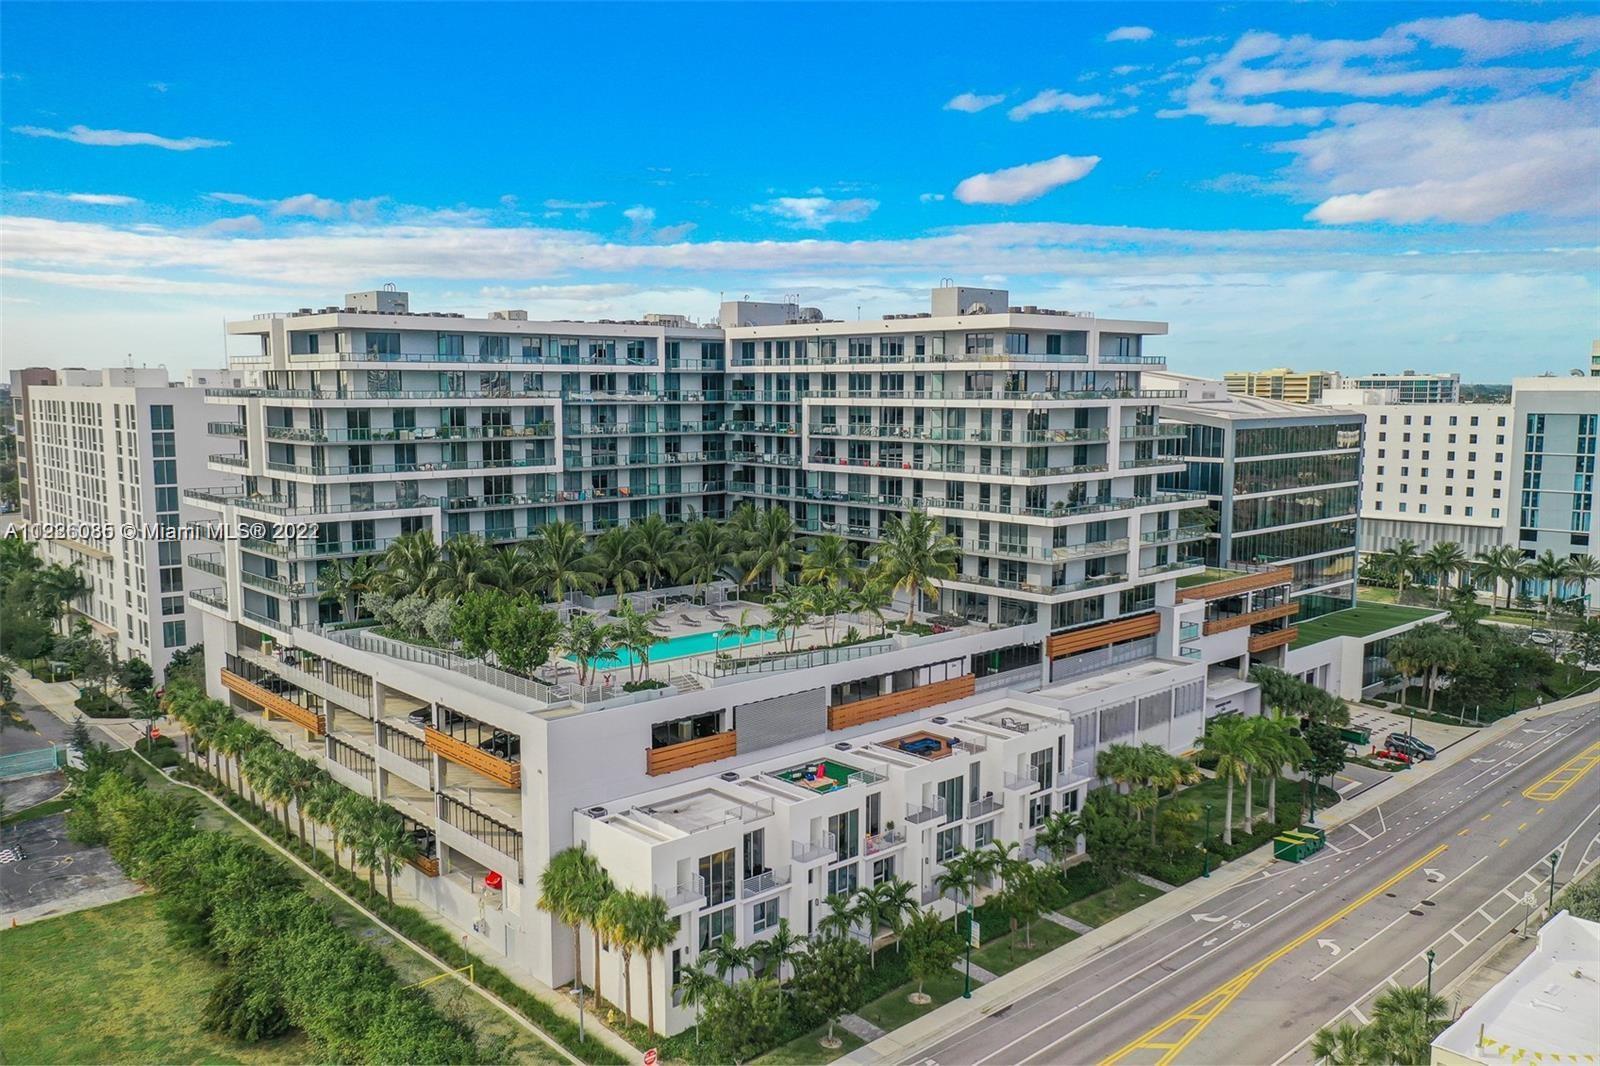 2bed/2 bath + Den Residence in the new center of Aventura City. New exclusive community- a city with